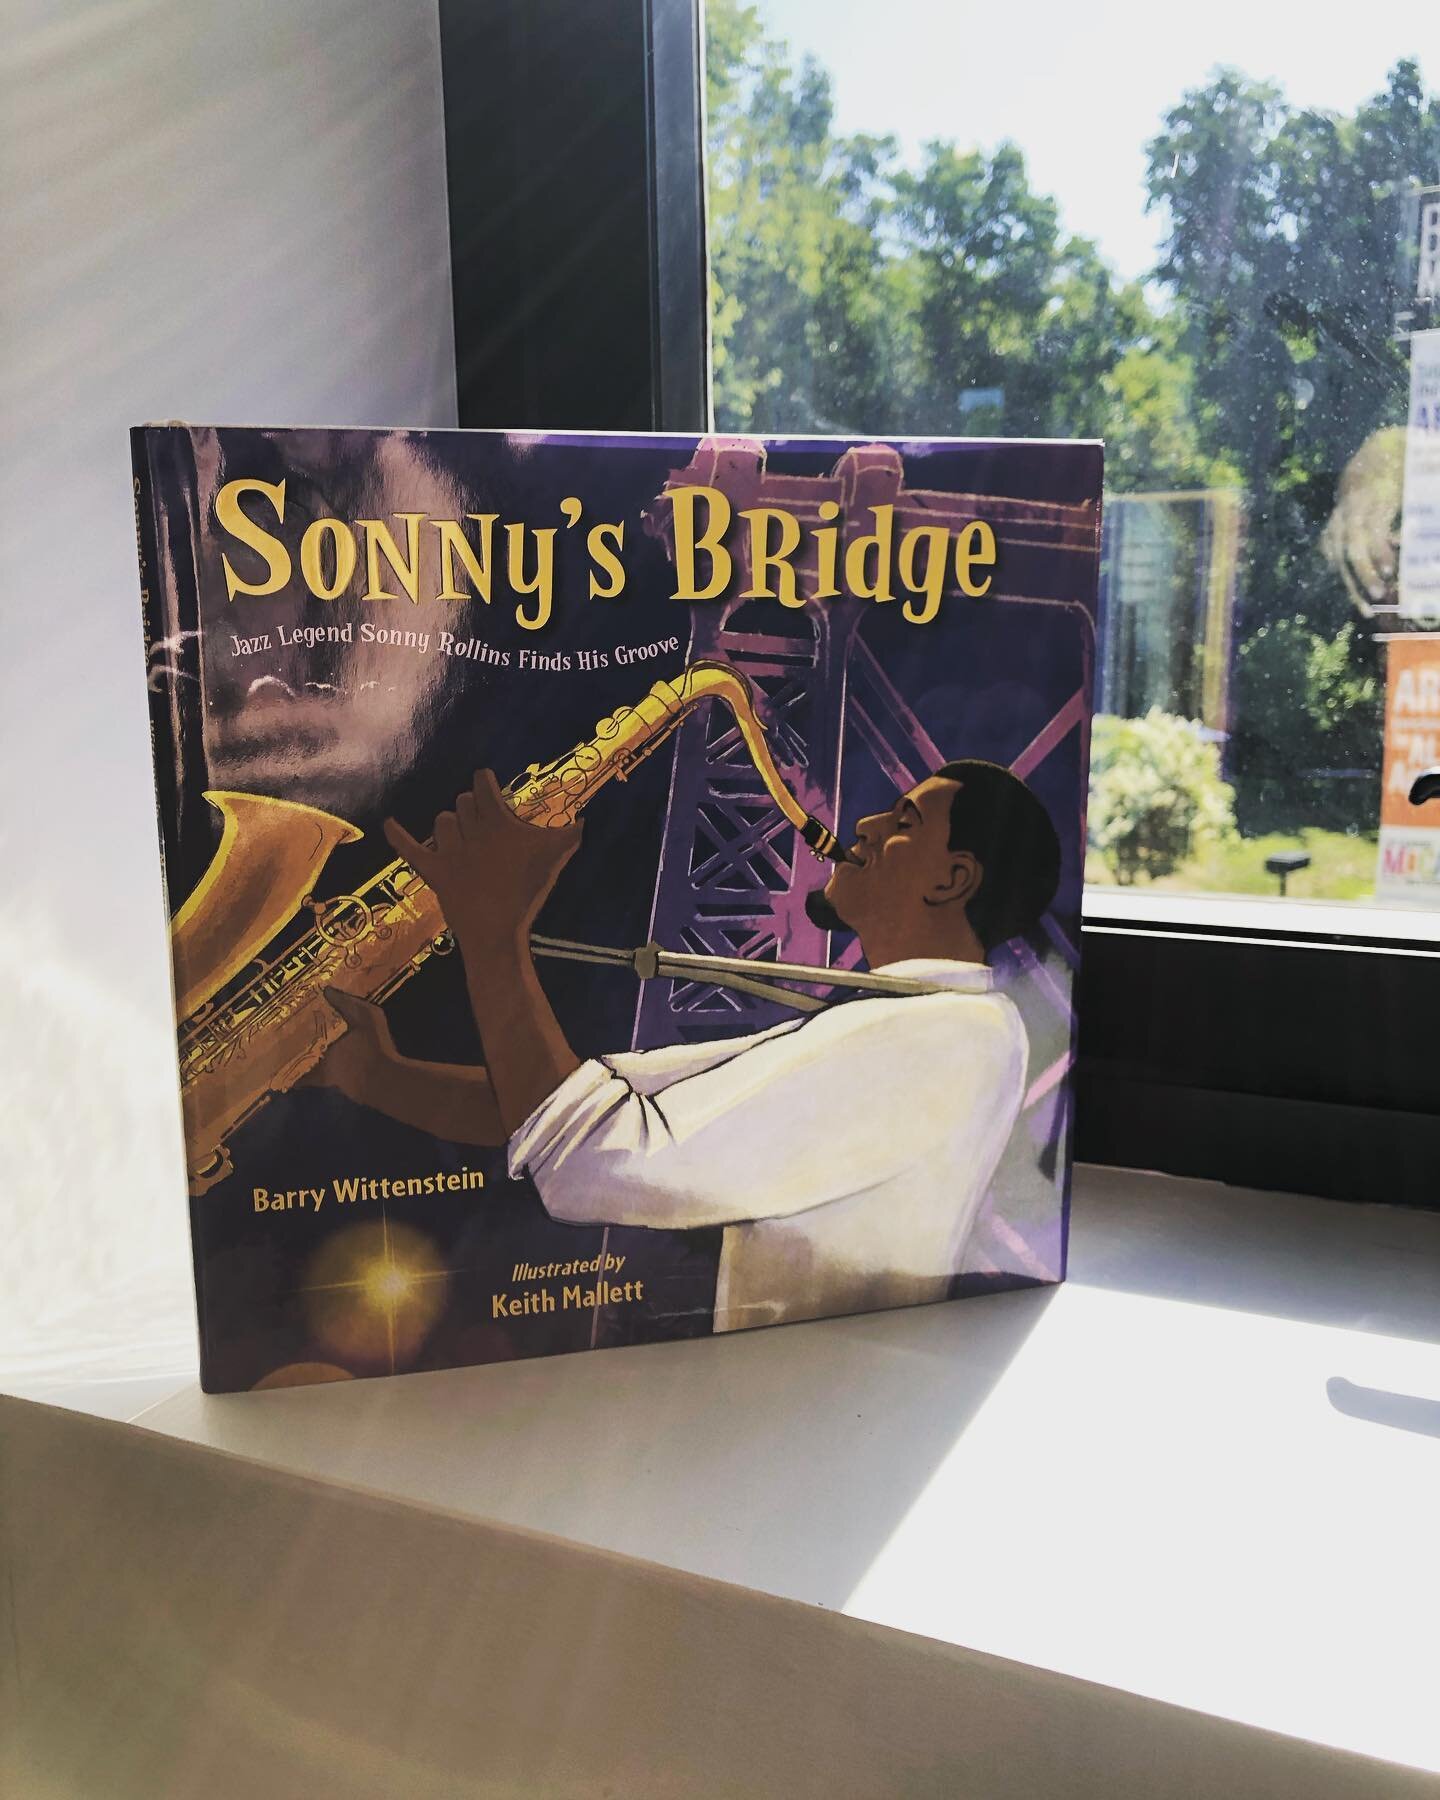 For our last morning with @mocawestport and #campmoca we will be enjoying music from faculty member Andrew Beals on saxophone and reading this awesome book called &ldquo;Sonny&rsquo;s Bridge&rdquo;, by Barry Wittenstein, with illustrations by Keith M